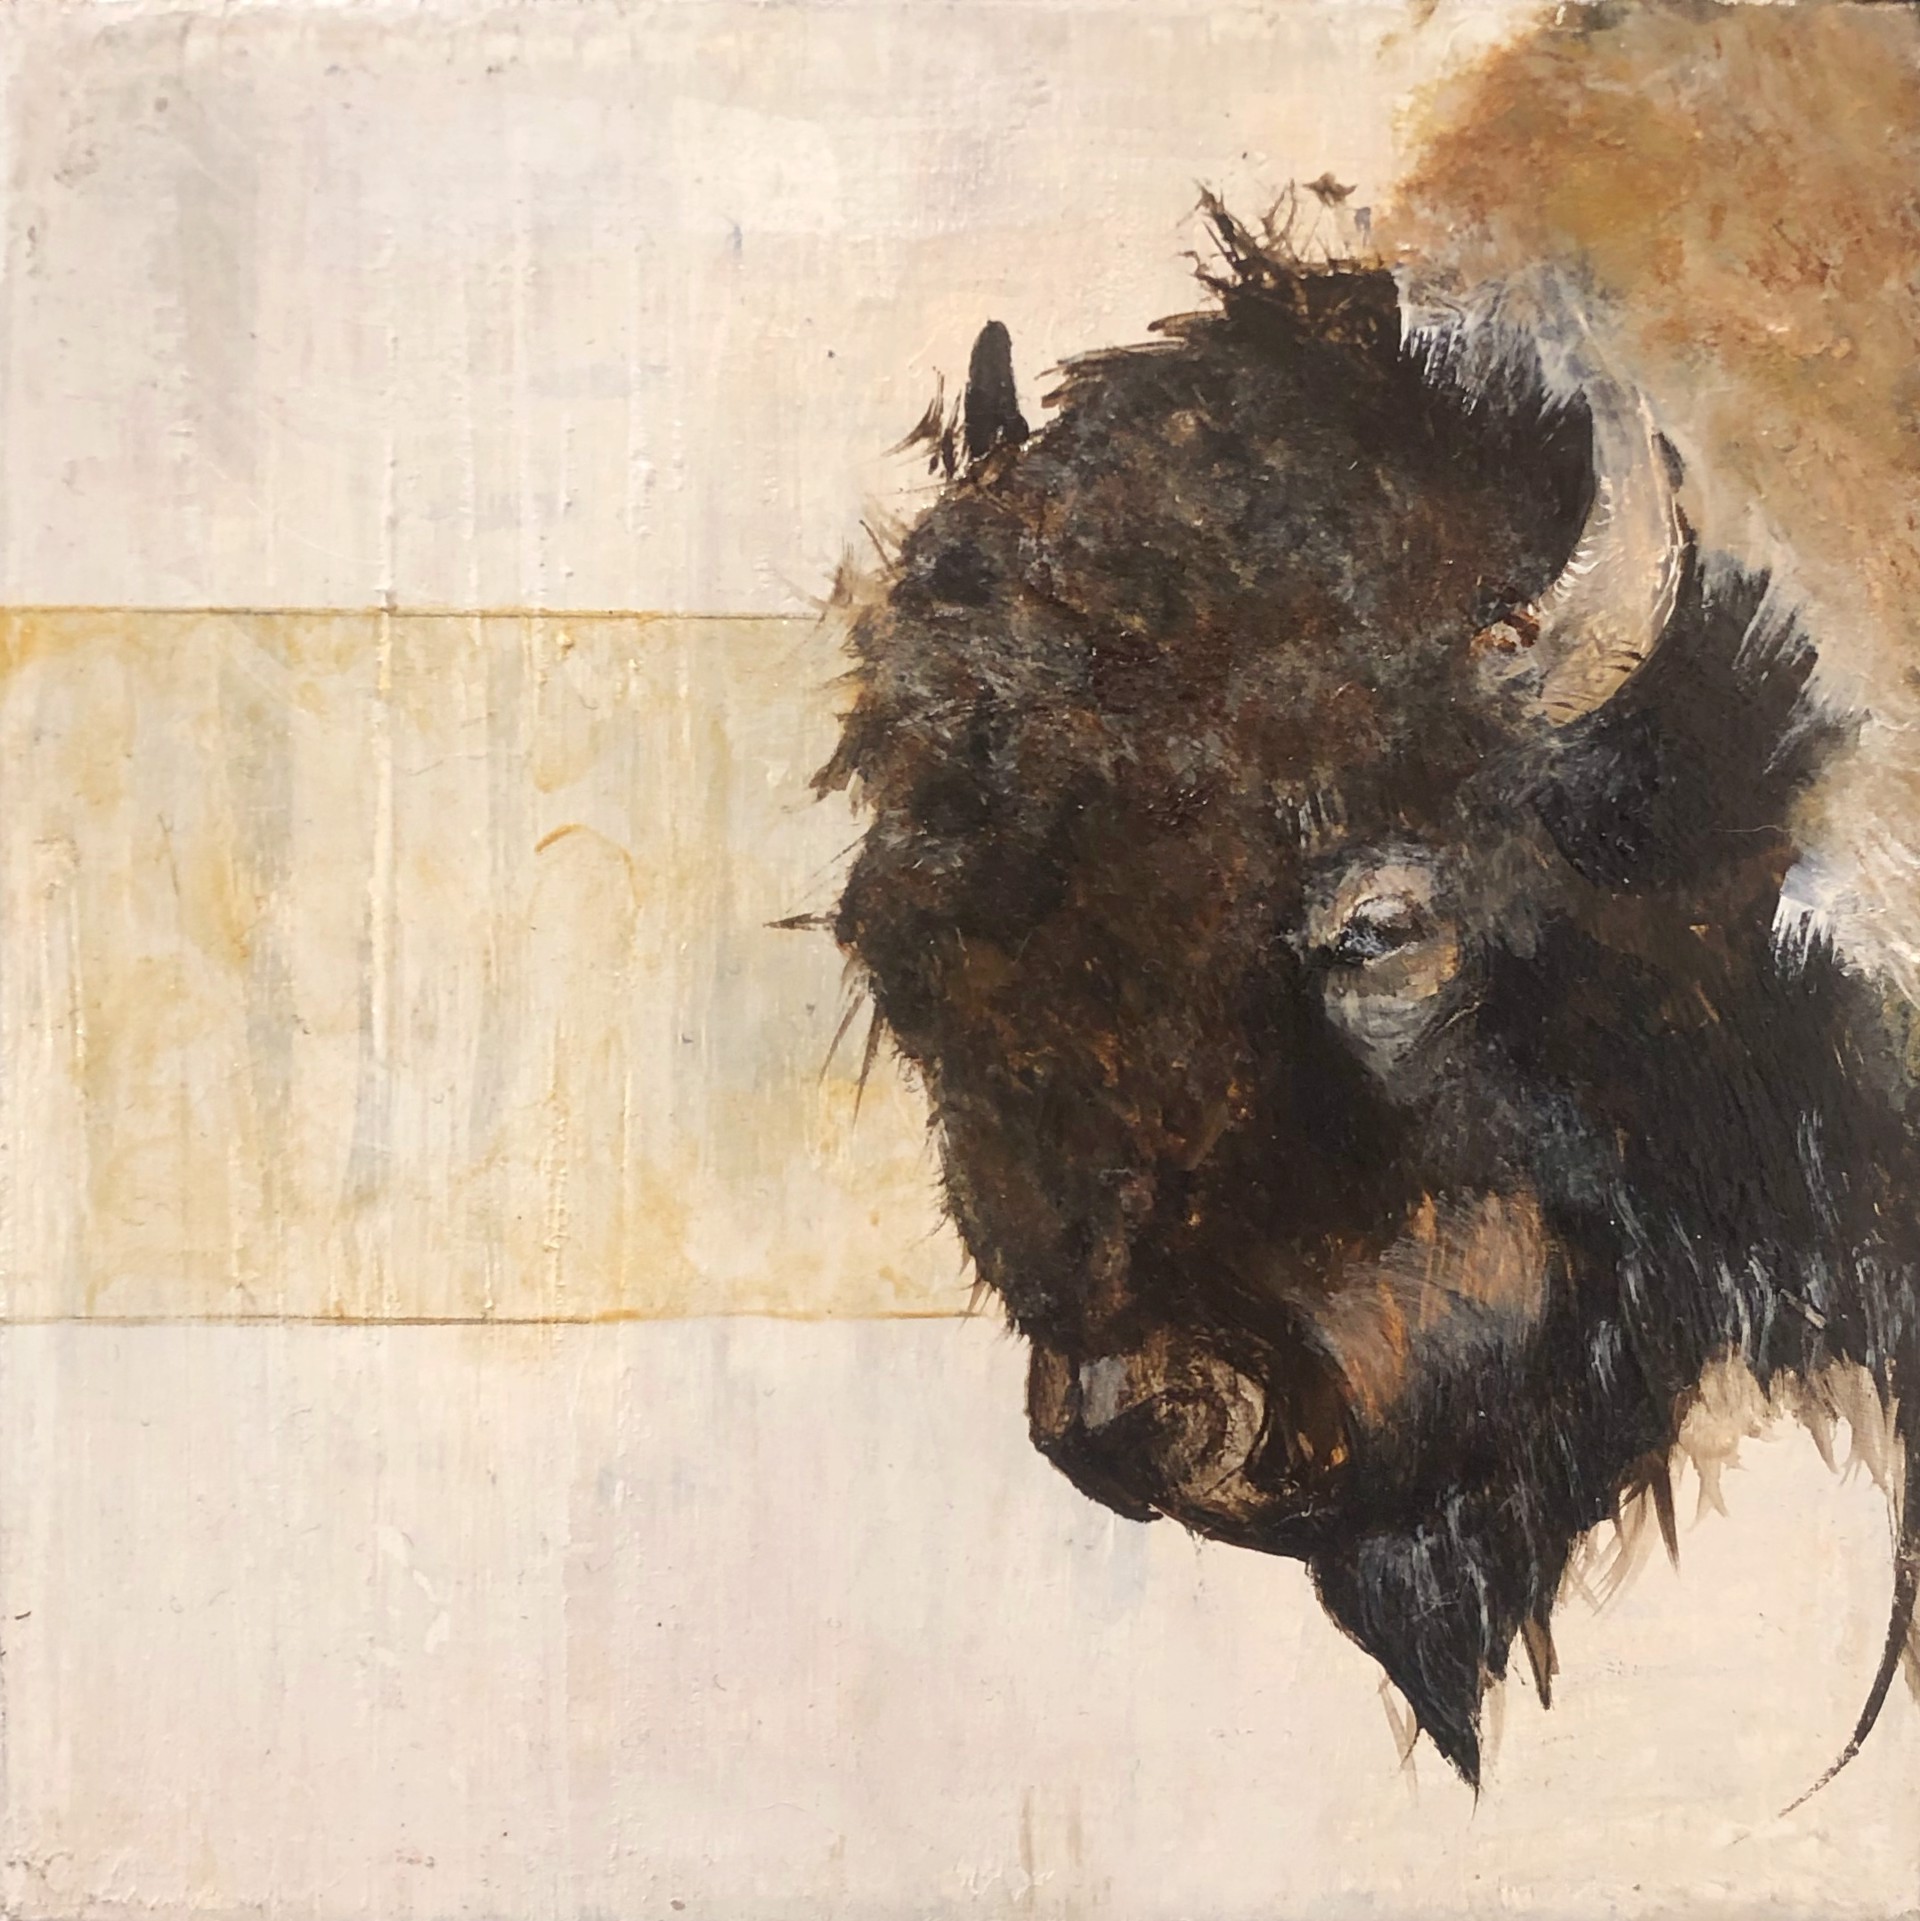 Original Oil painting Of A Bison Or Buffalo Face On A Contemporary Cream And Gold Background With A Warm Gold Silver Frame, By Jenna Von Benedikt